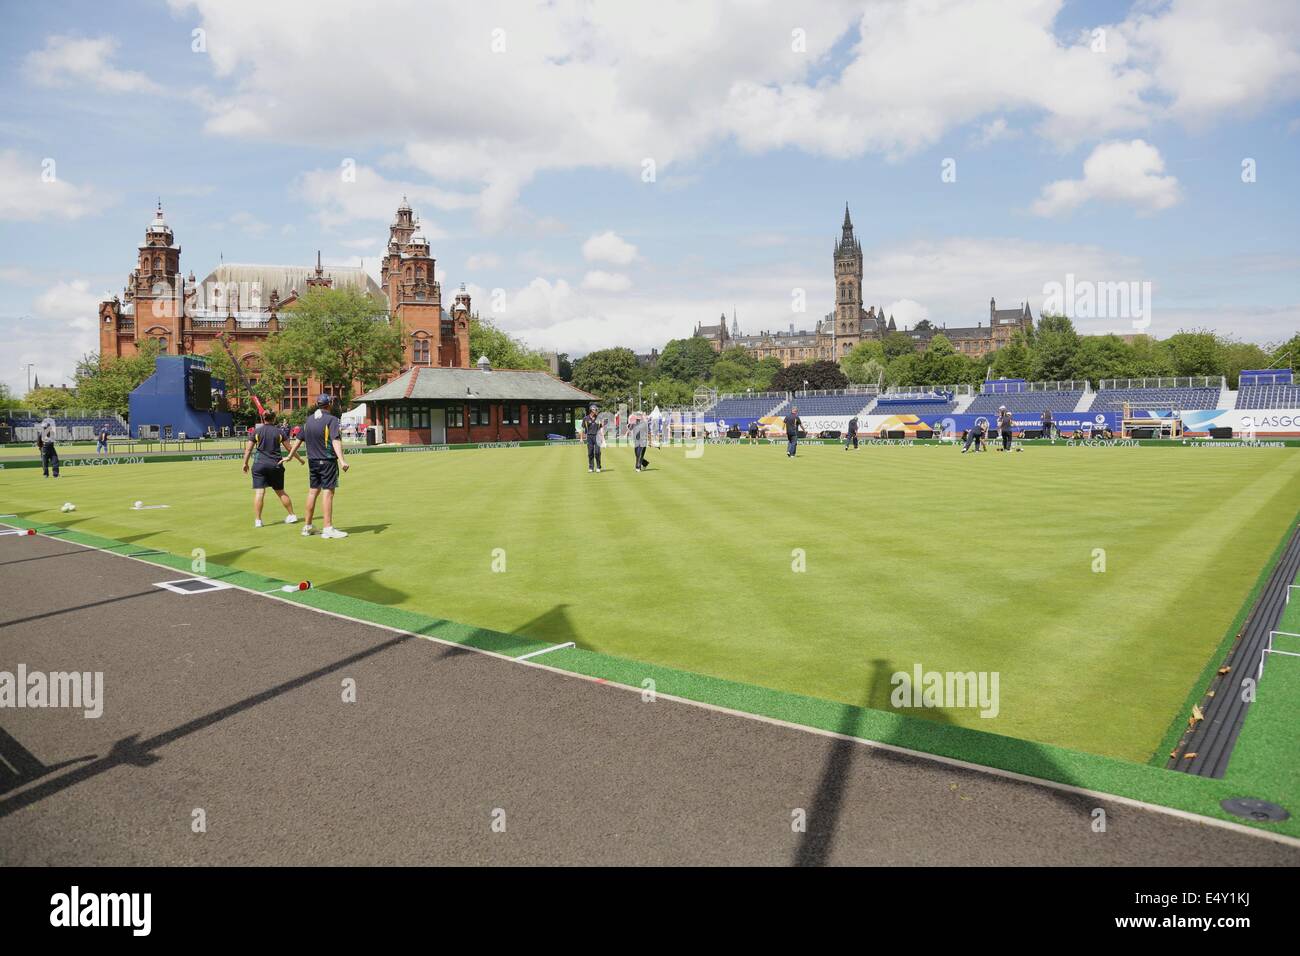 Kelvingrove Lawn Bowls Centre, Glasgow, Scotland, UK, Thursday, 17th July, 2014. Team Australia training in the venue for the 2014 Commonwealth Games Lawn Bowls Competition Stock Photo